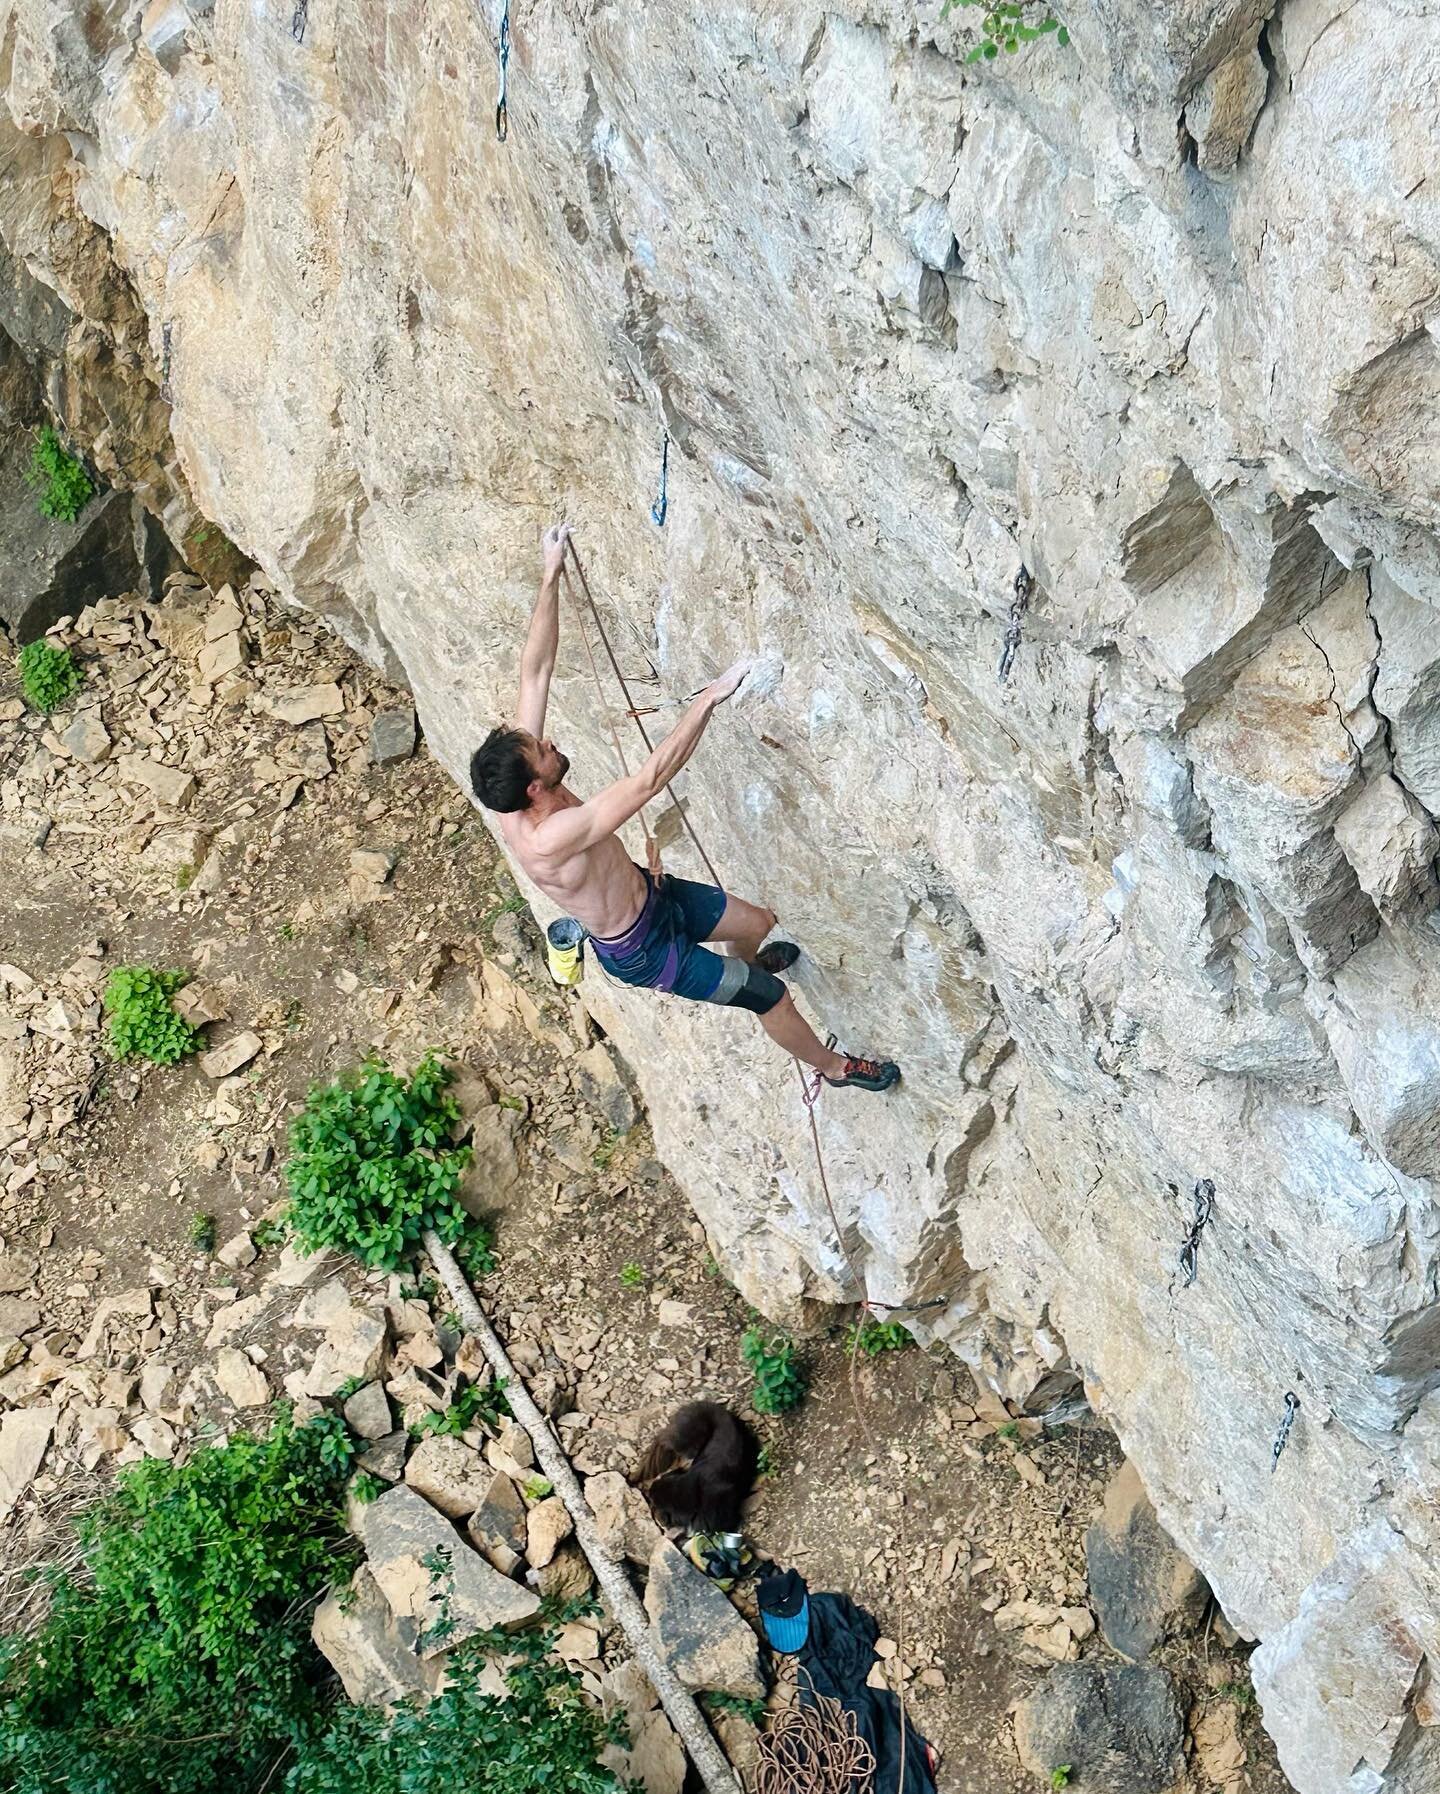 This climb taught me a lesson about keeping an open mind, and having strong fingers. 

Mr. Bigglesworth is one of northern New Mexico&rsquo;s hardest climbs (14a) and the centerpiece at a local crag I&rsquo;ve been frequenting when back in Taos. I tr